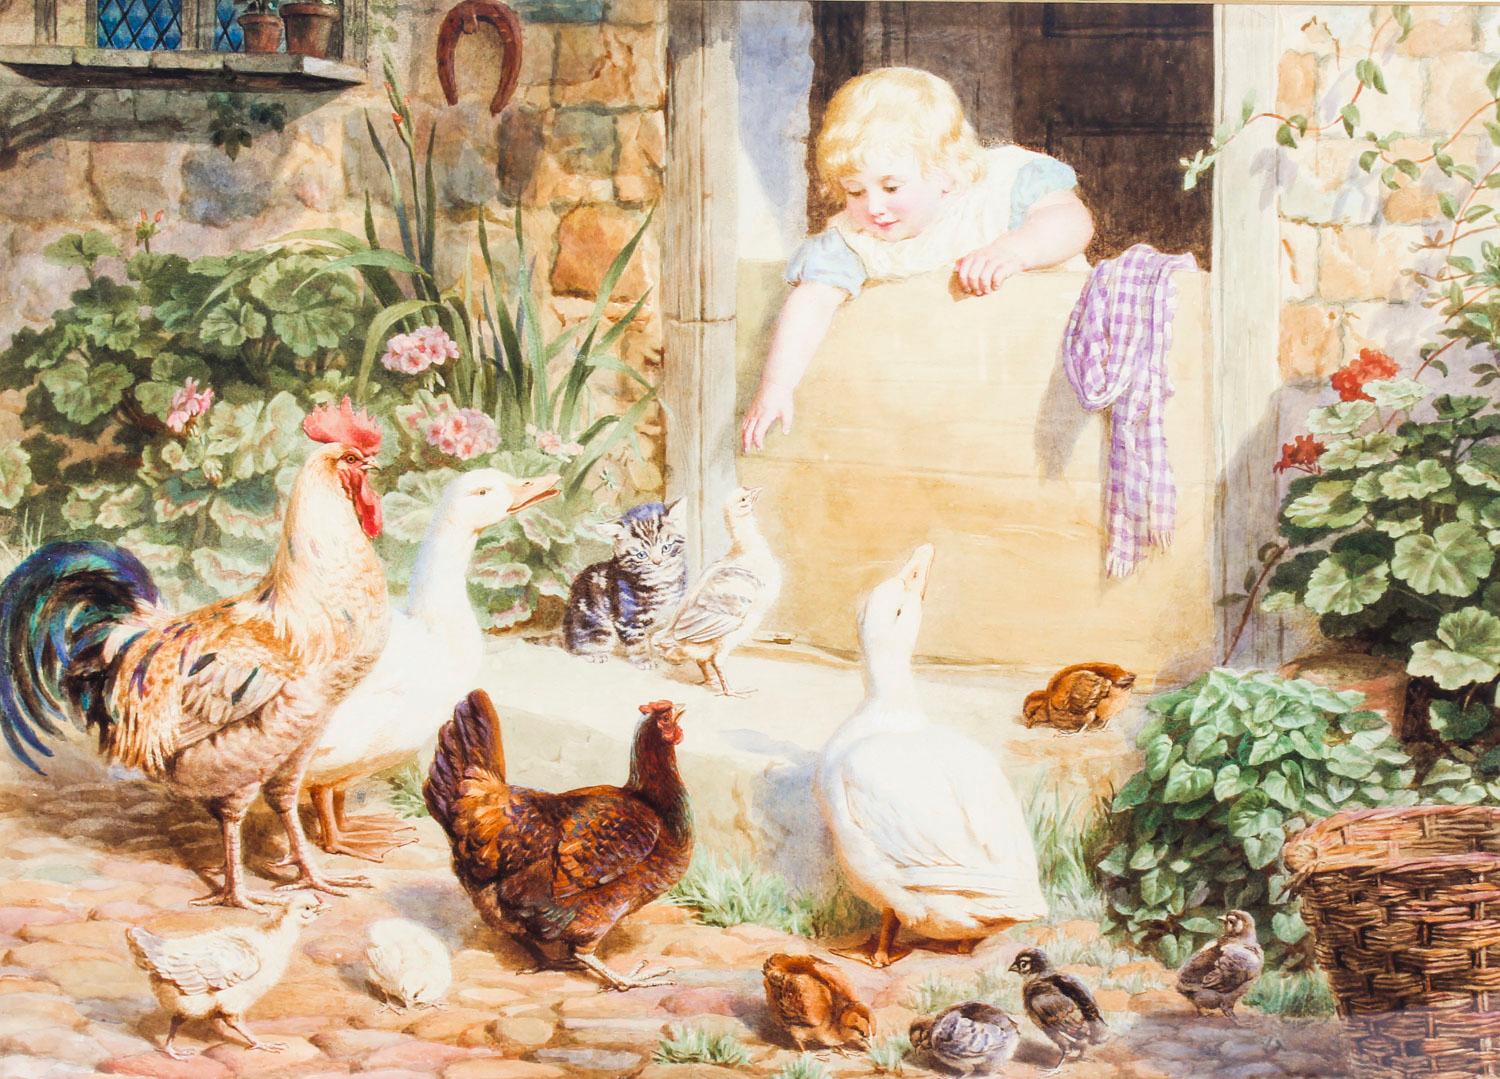 A large beautiful Medici society print of Helena Maguire's painting titled 'Friends All Round', late 20th century in date.

This colorful print features a little girl feeding farm animals through the half-open door of a country cottage.

Add